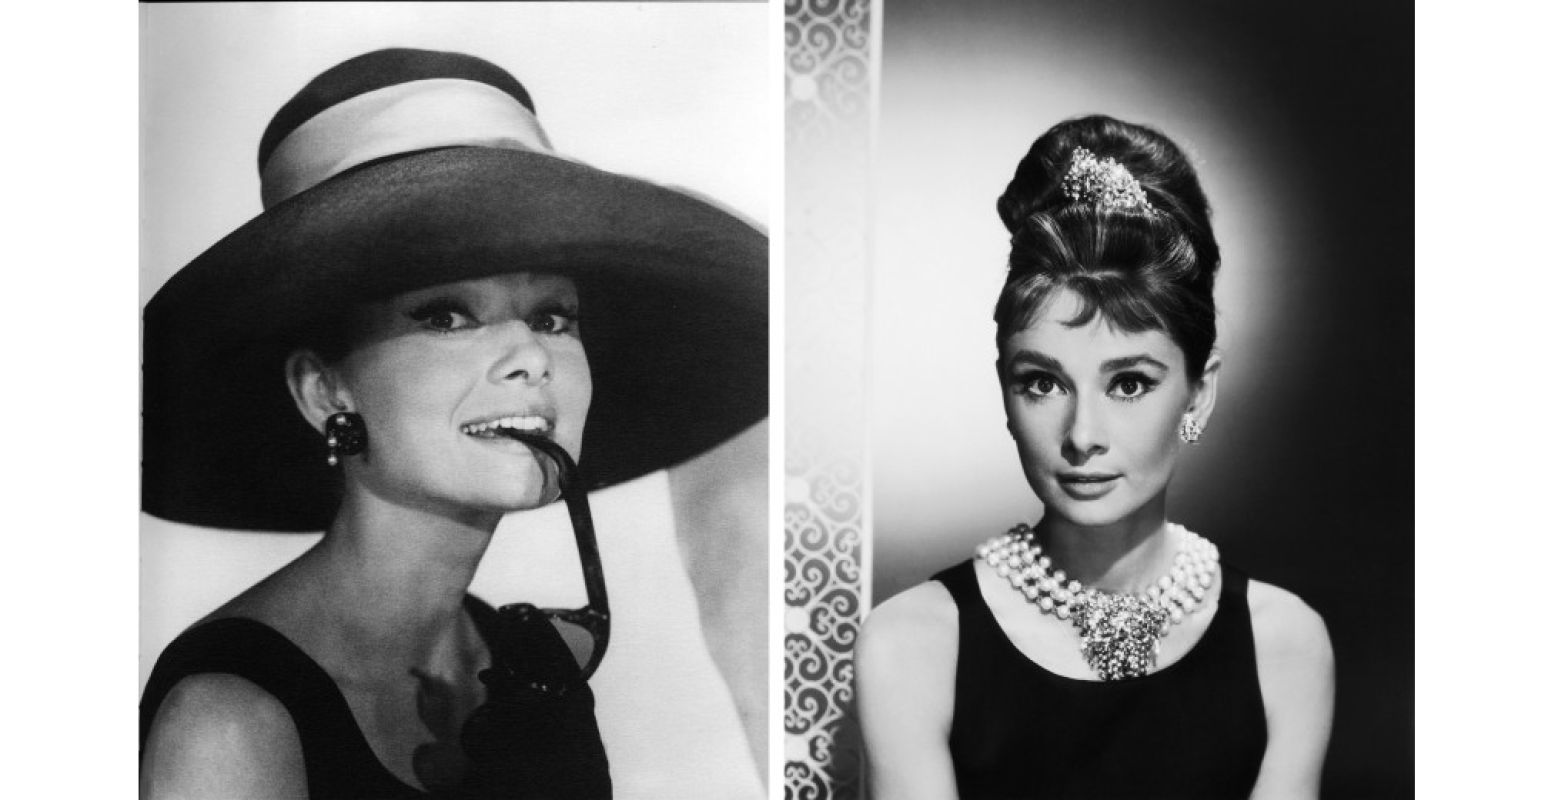 Audrey Hepburn in Breakfast at Tiffany's. Foto links: Donaldson Collection/Getty Images. Foto rechts: George Rinhart/Getty Images.